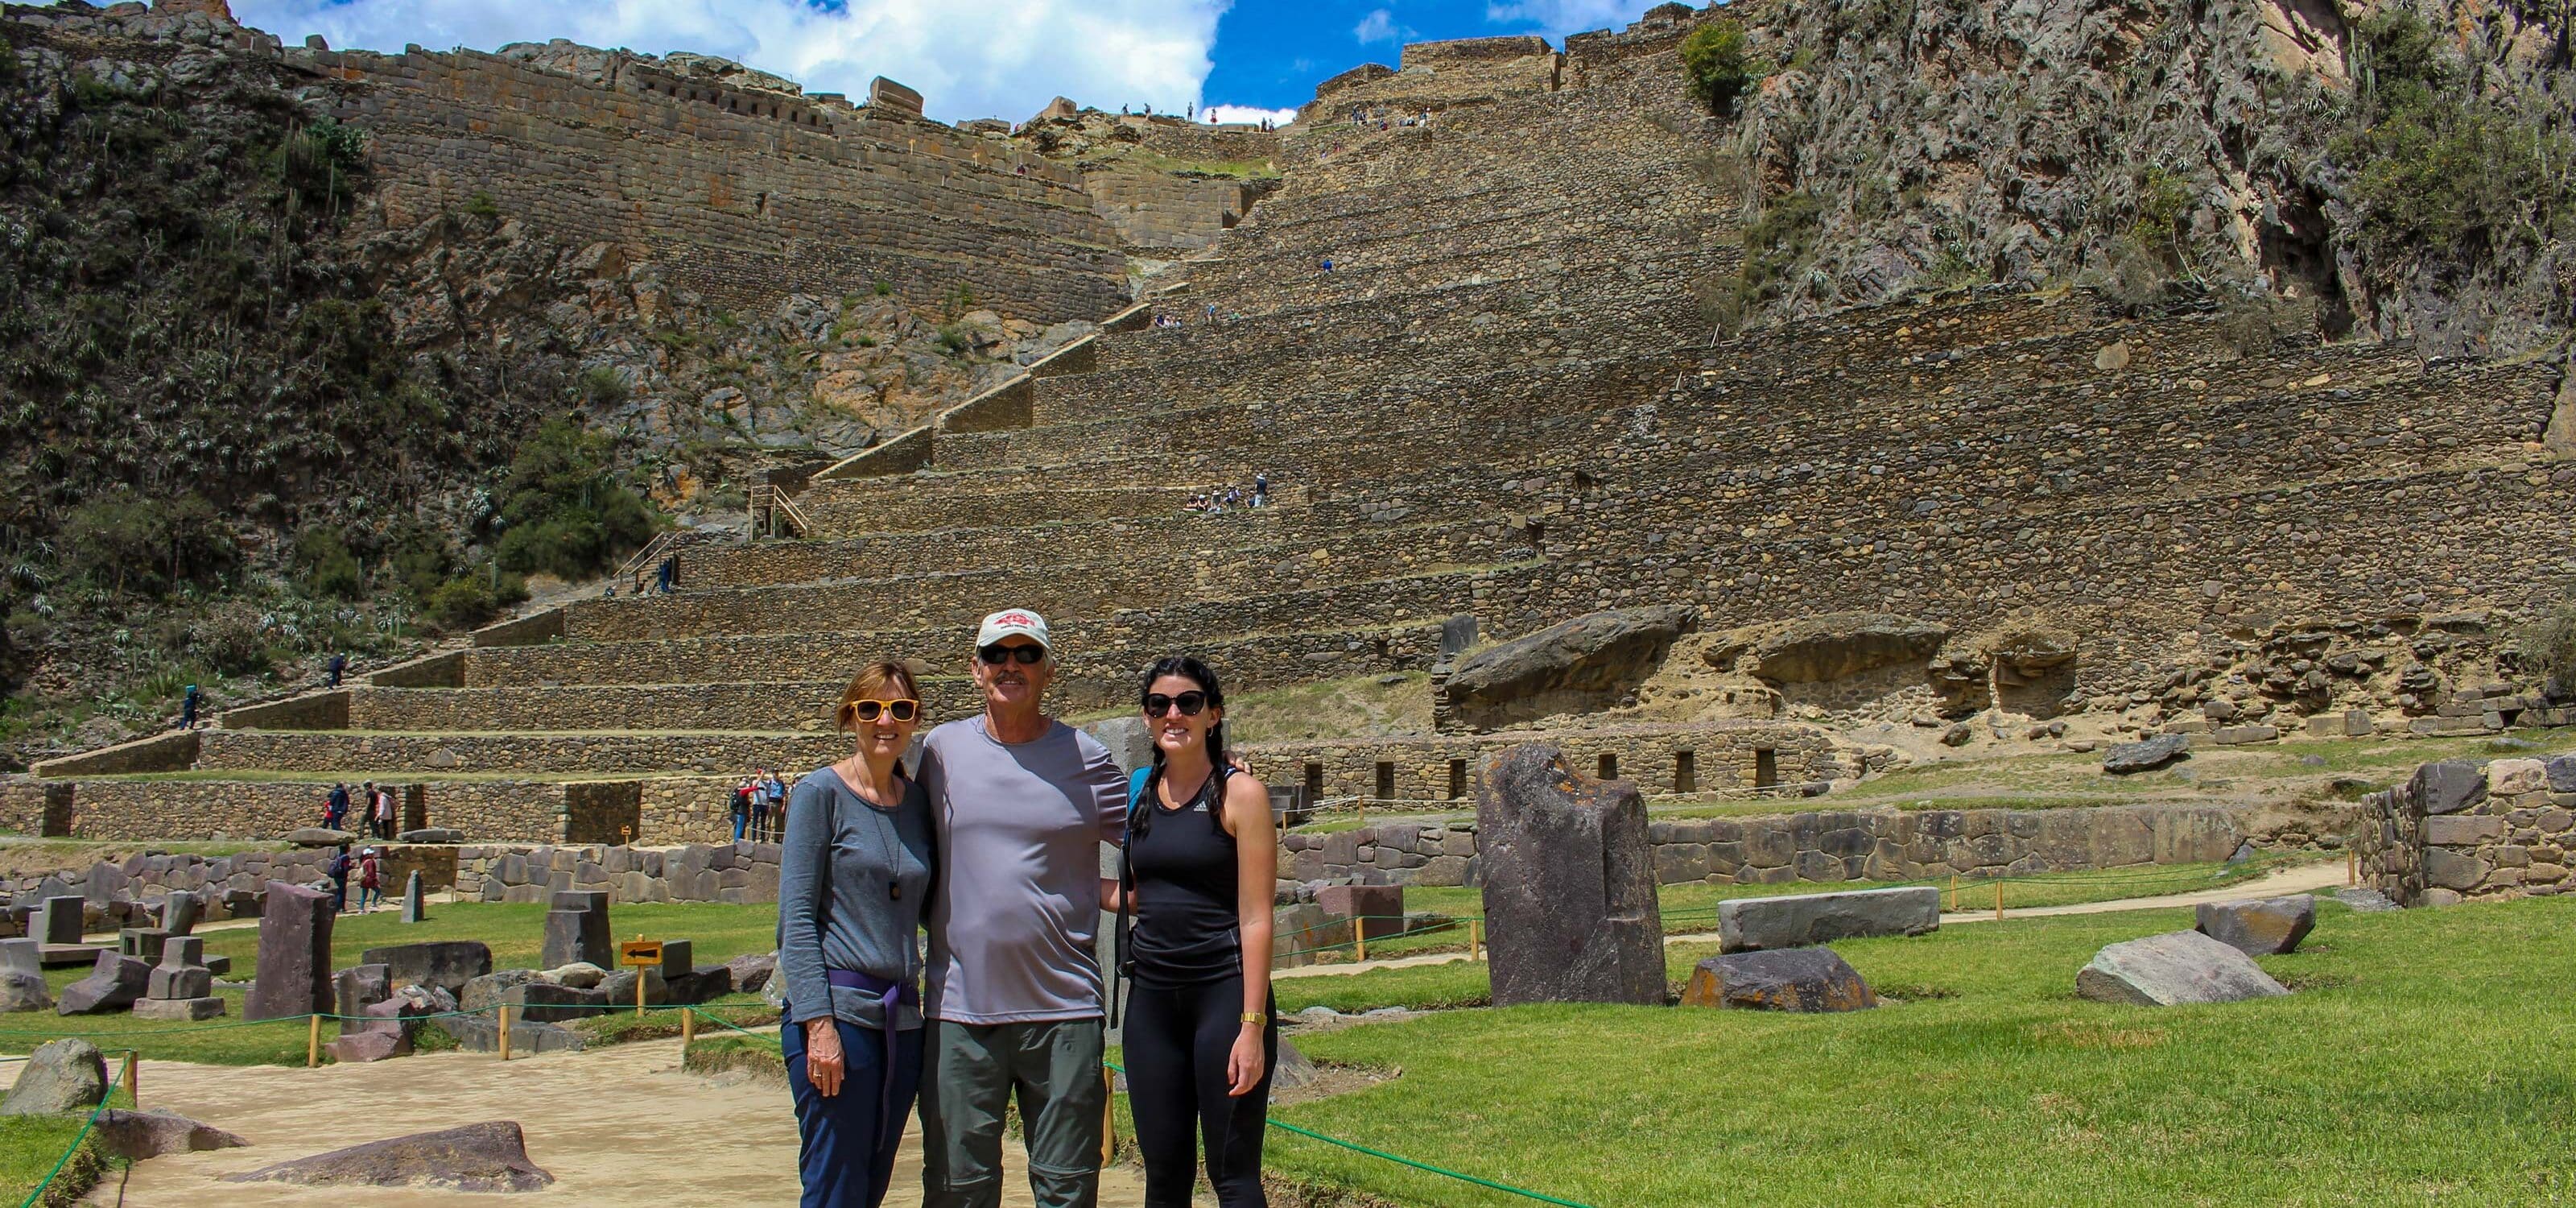 Sacred Valley Of The Incas Tour With Moray & The Salt Mines